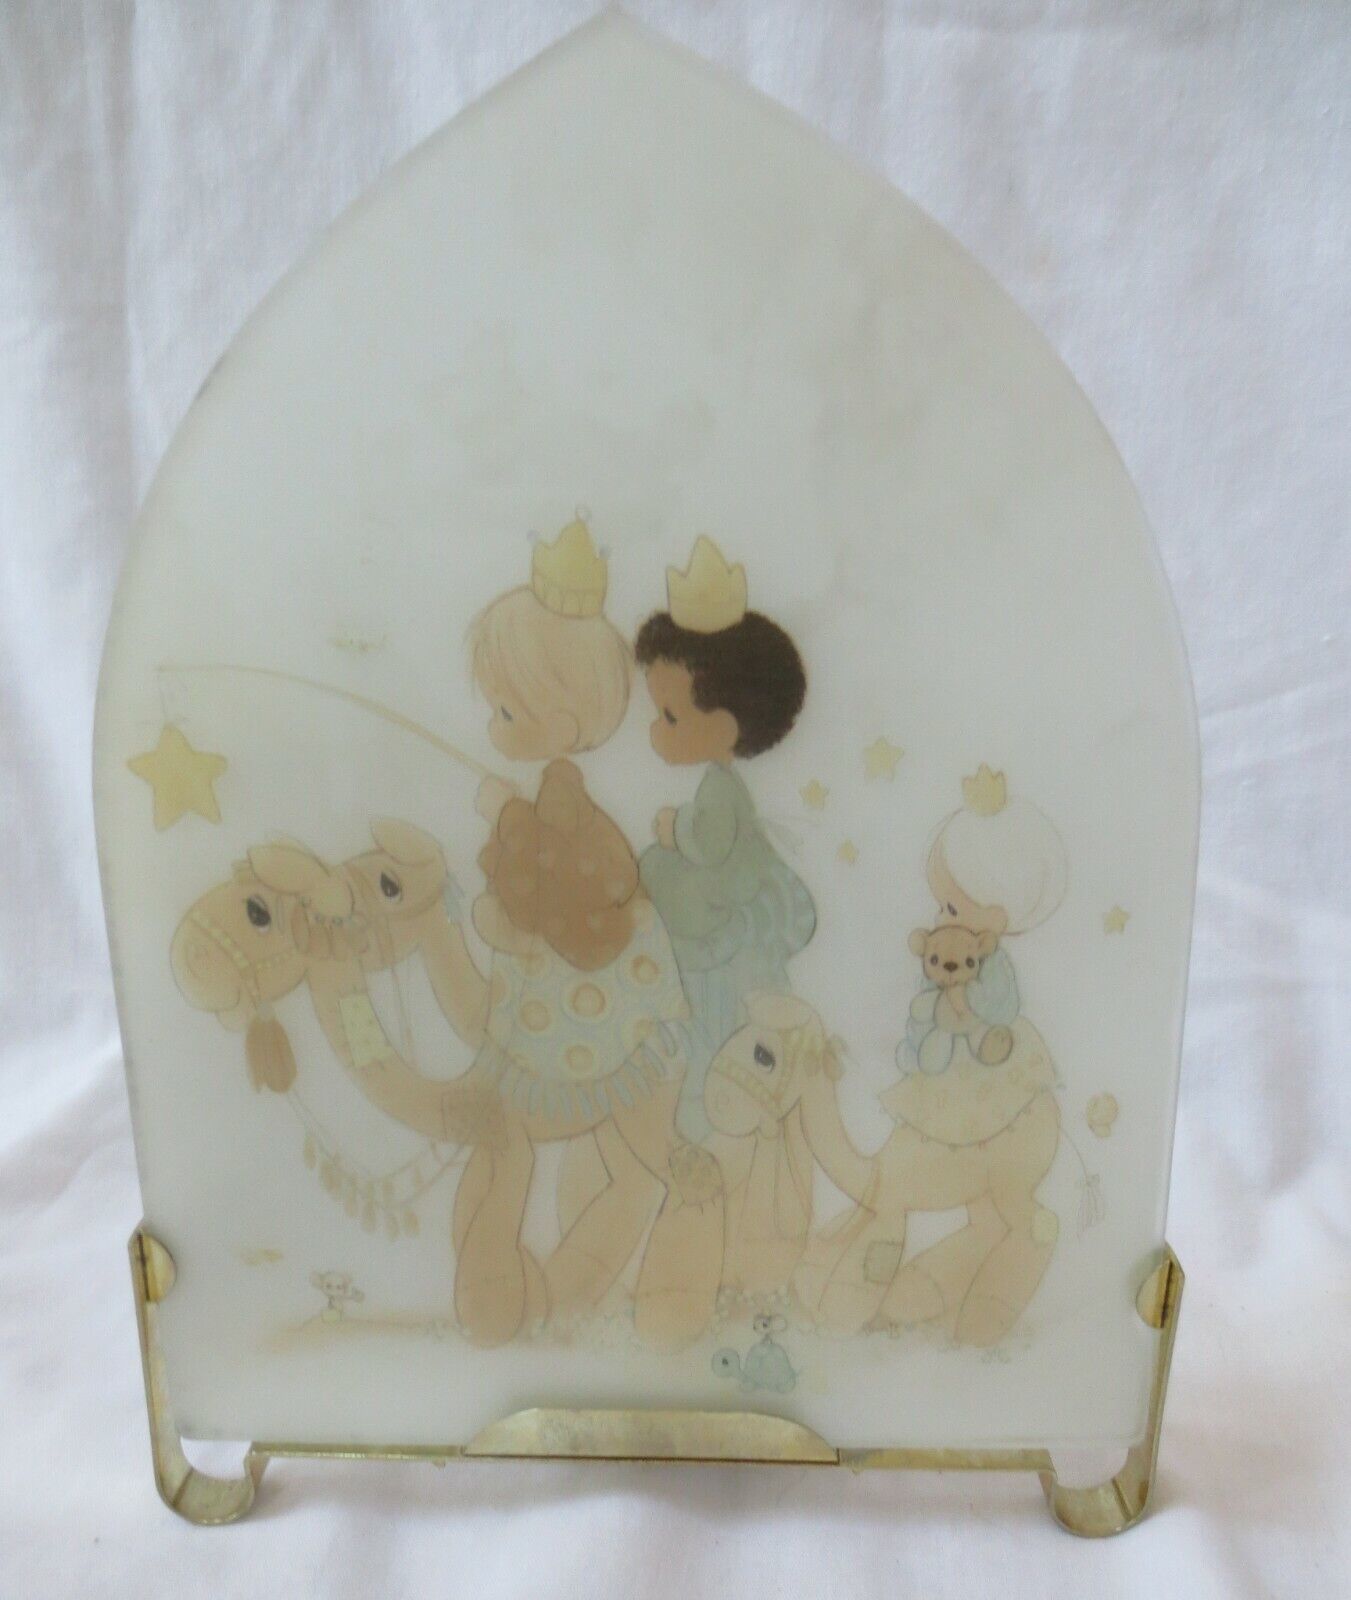 Vtg Precious Moments Stained Glass Effect Follow Star Candle Holder Rare 70's - $25.00